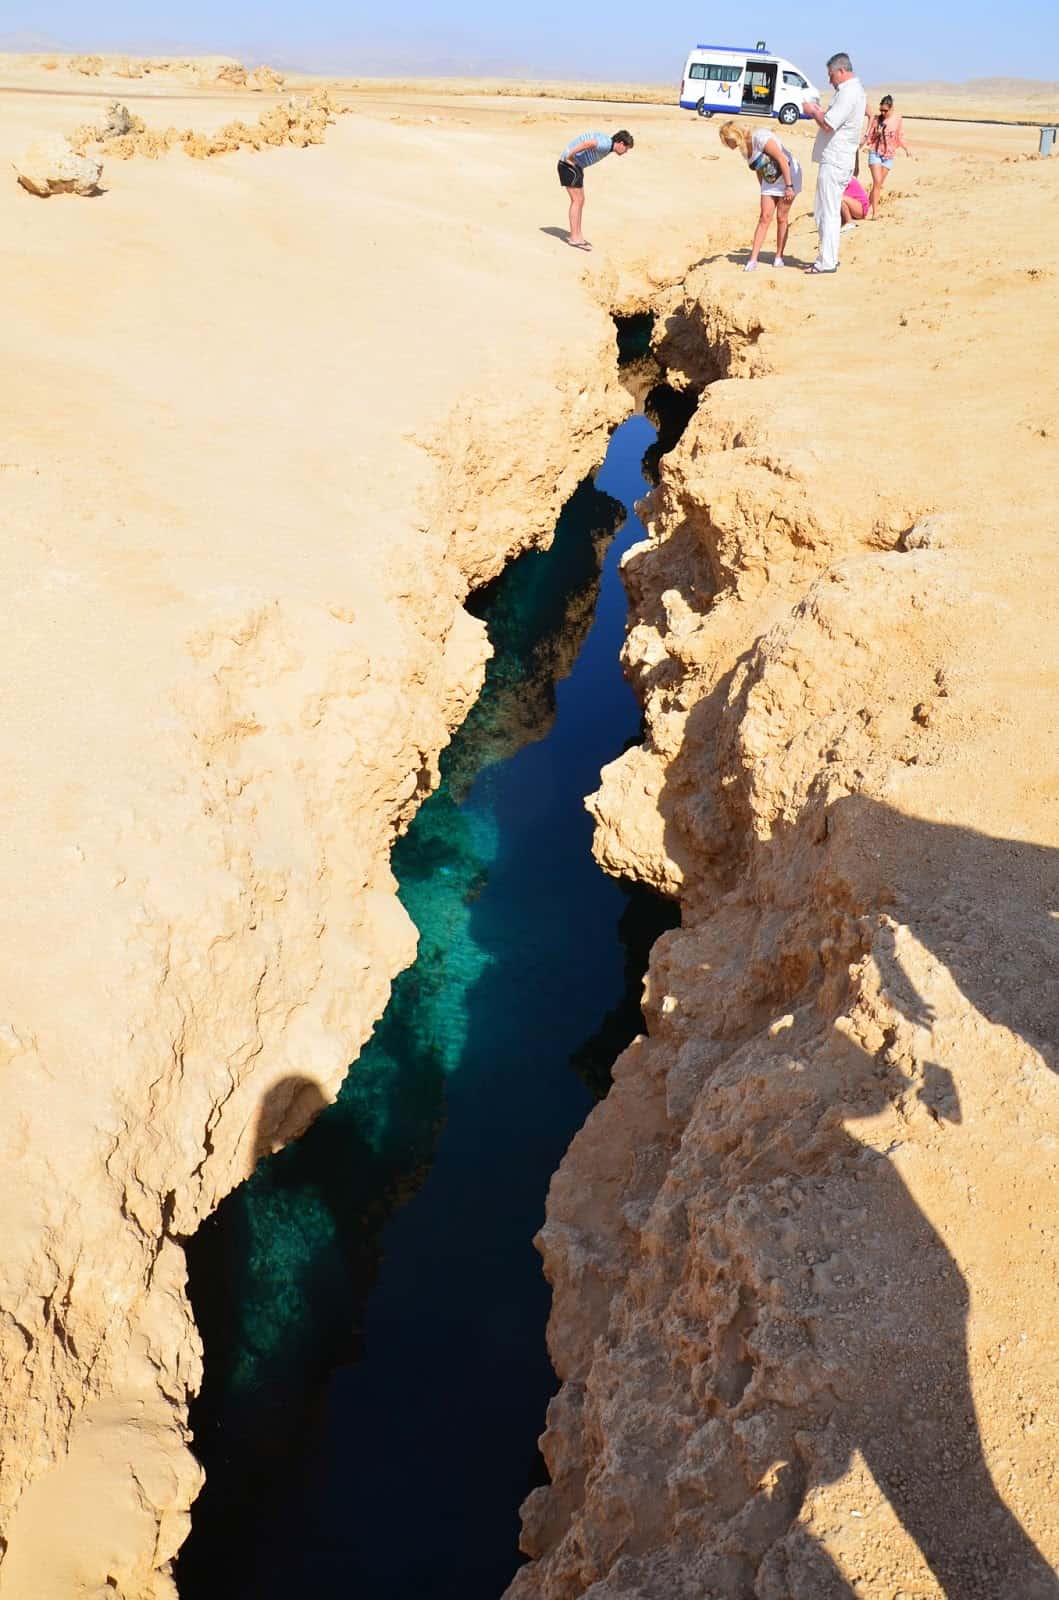 Cracks from an earthquake at Ras Mohammad National Park in Sinai, Egypt